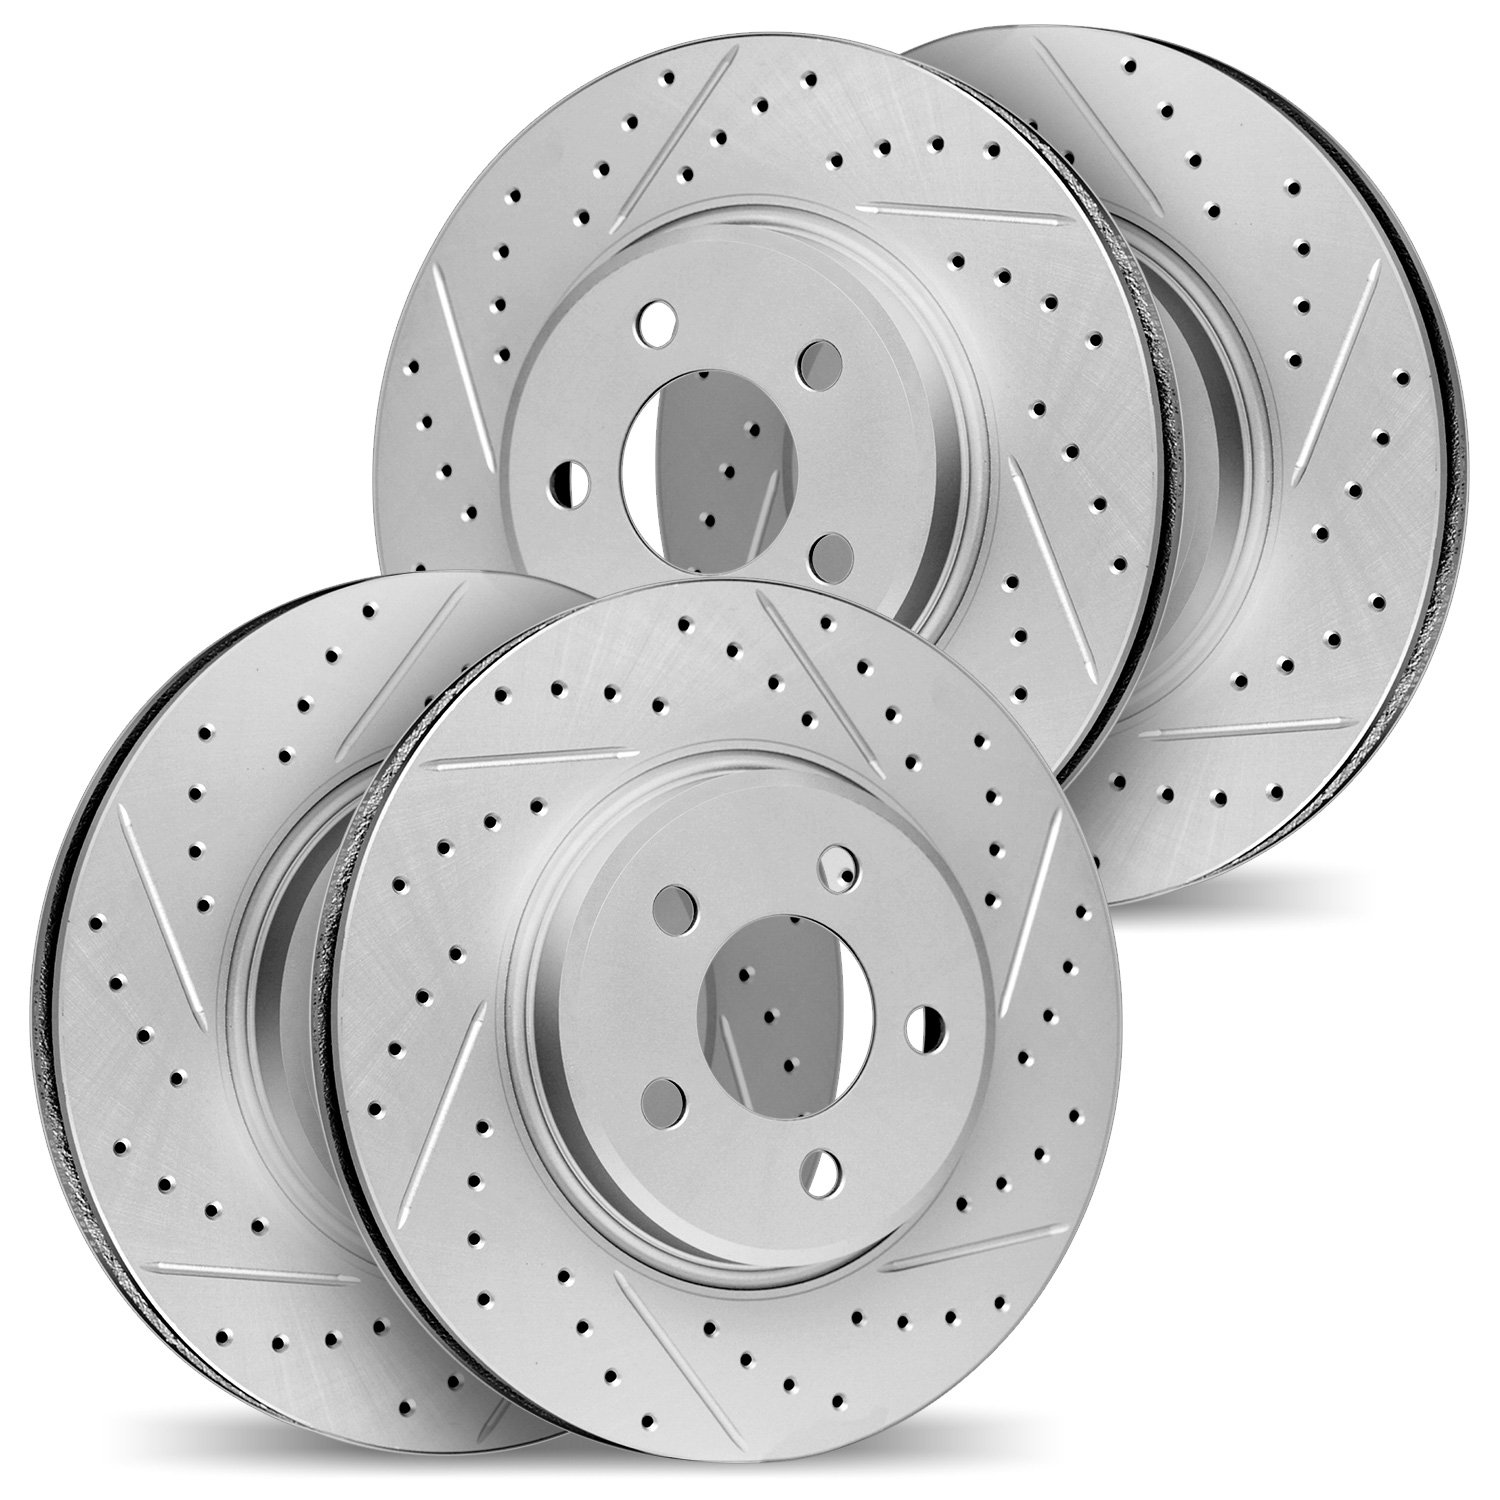 2004-63036 Geoperformance Drilled/Slotted Brake Rotors, Fits Select Mercedes-Benz, Position: Front and Rear